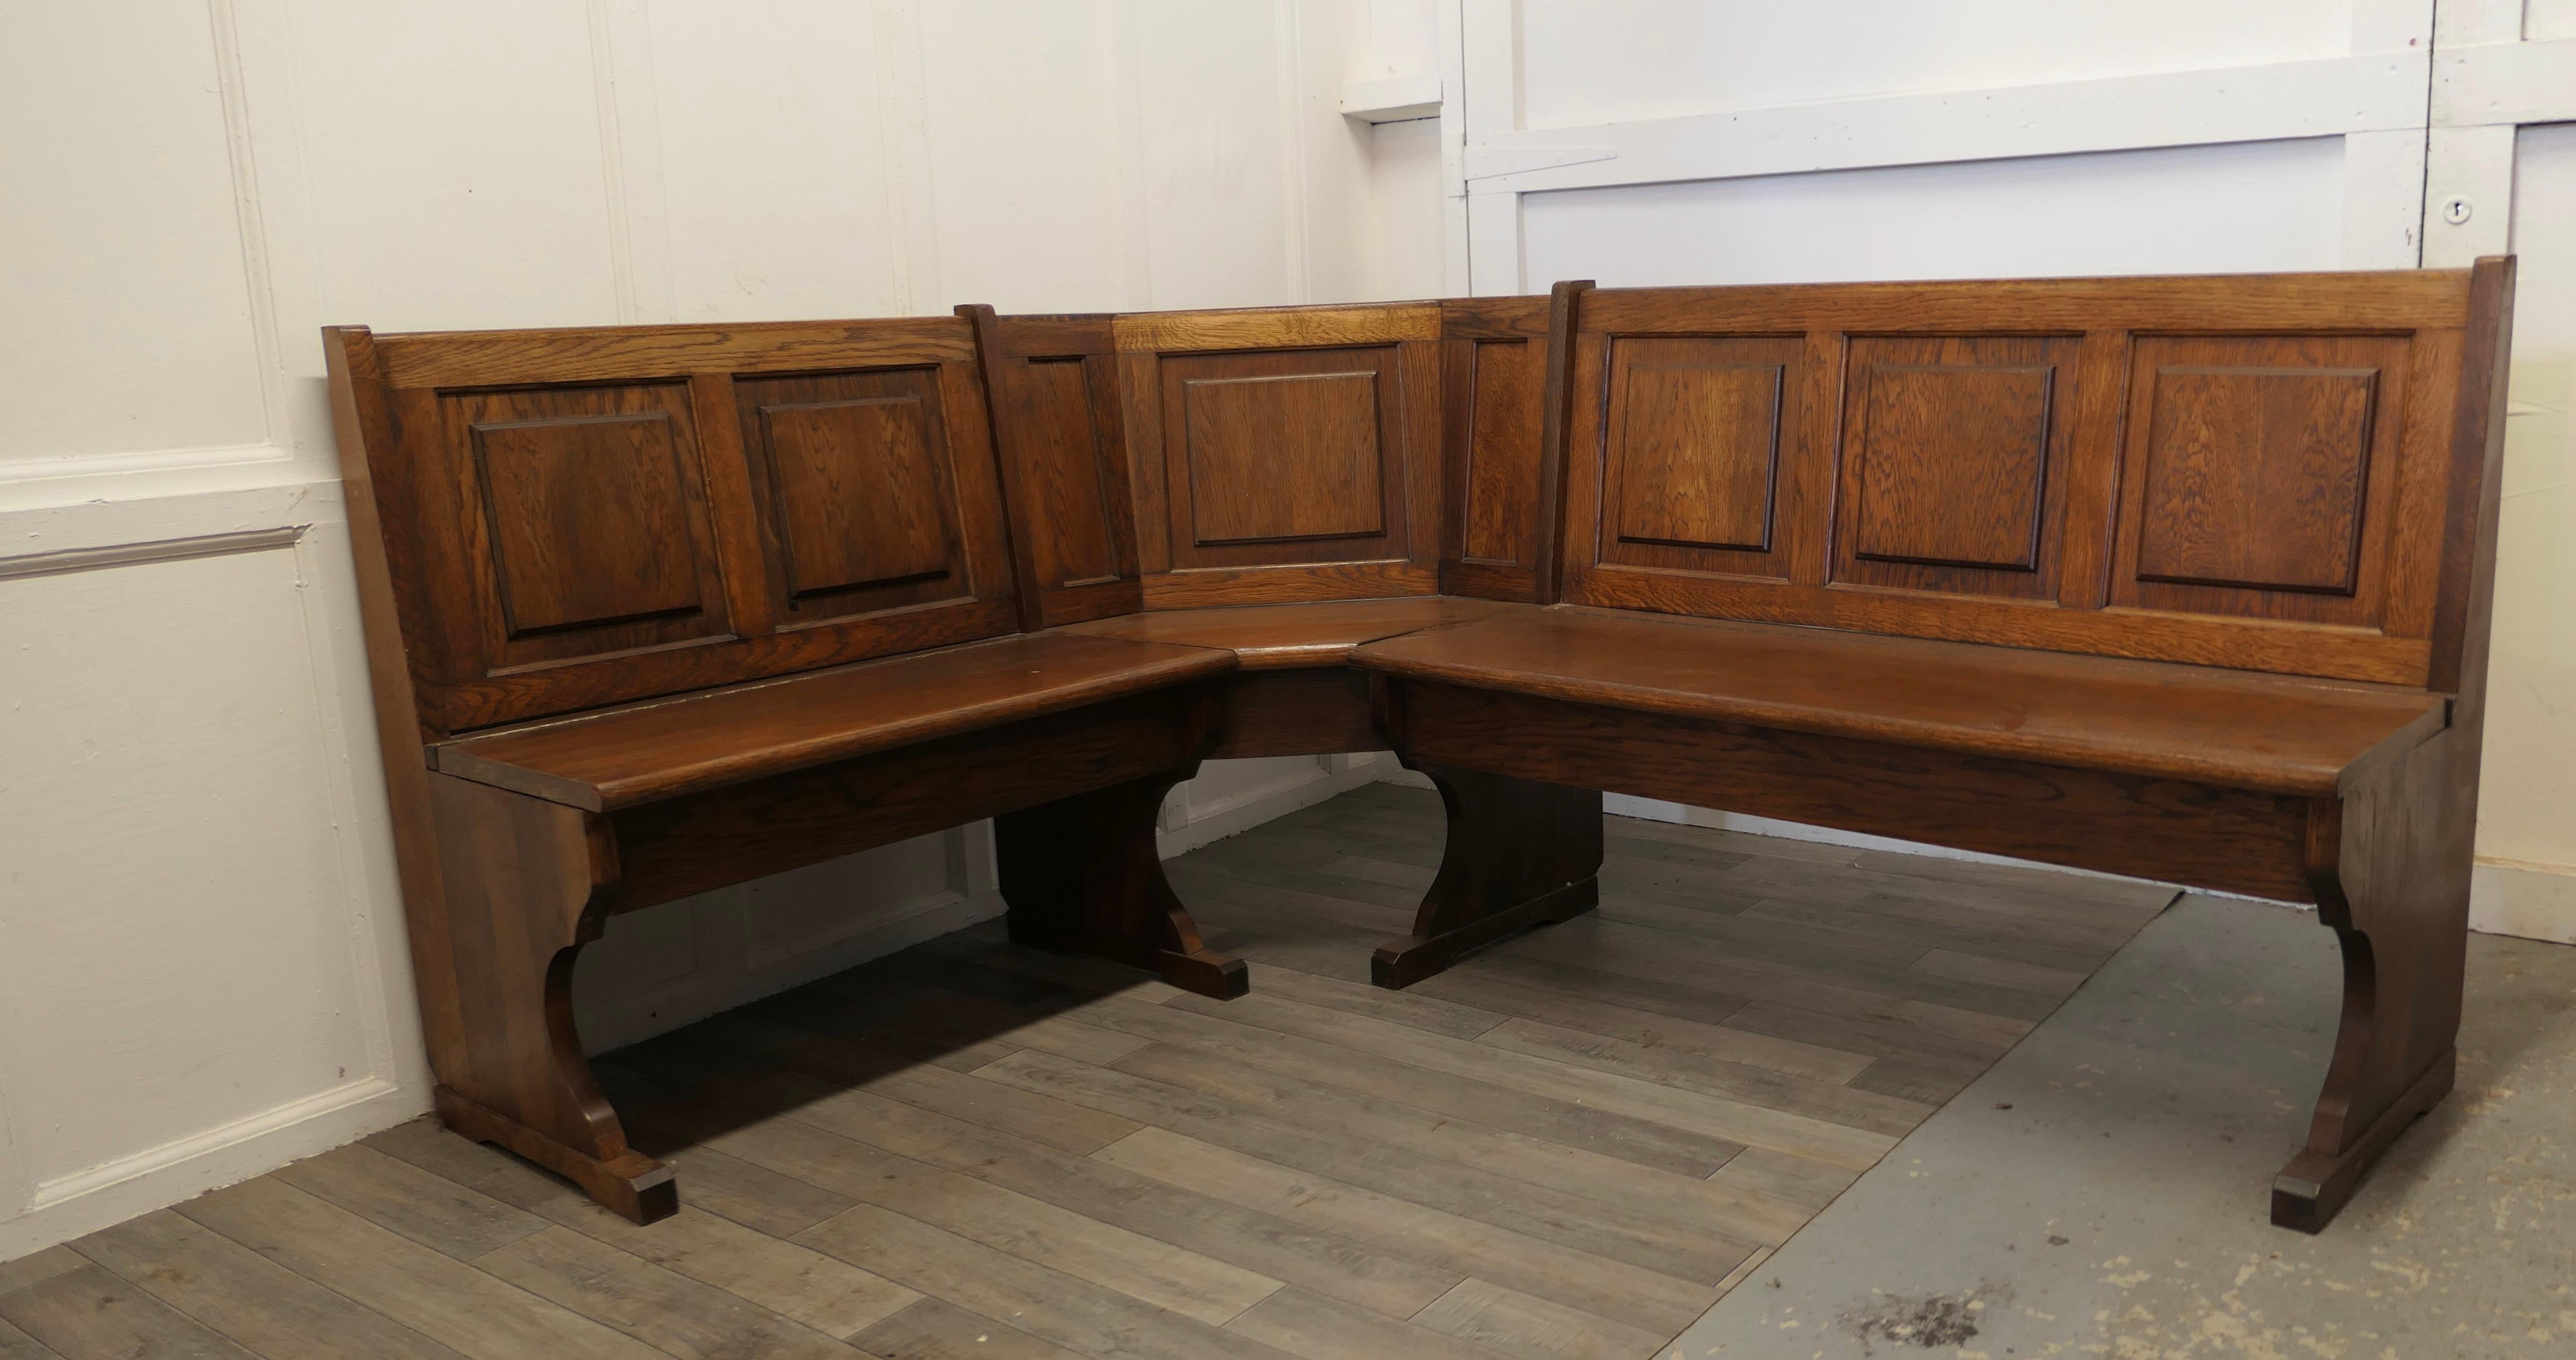 Oak Panelled pub corner settle or kitchen bench

This is a great looking piece in medium colored Oak, it has a three panelled bench seat at one side and a similar two seater at the other, with a corner unit between, the set is dismantle-able for